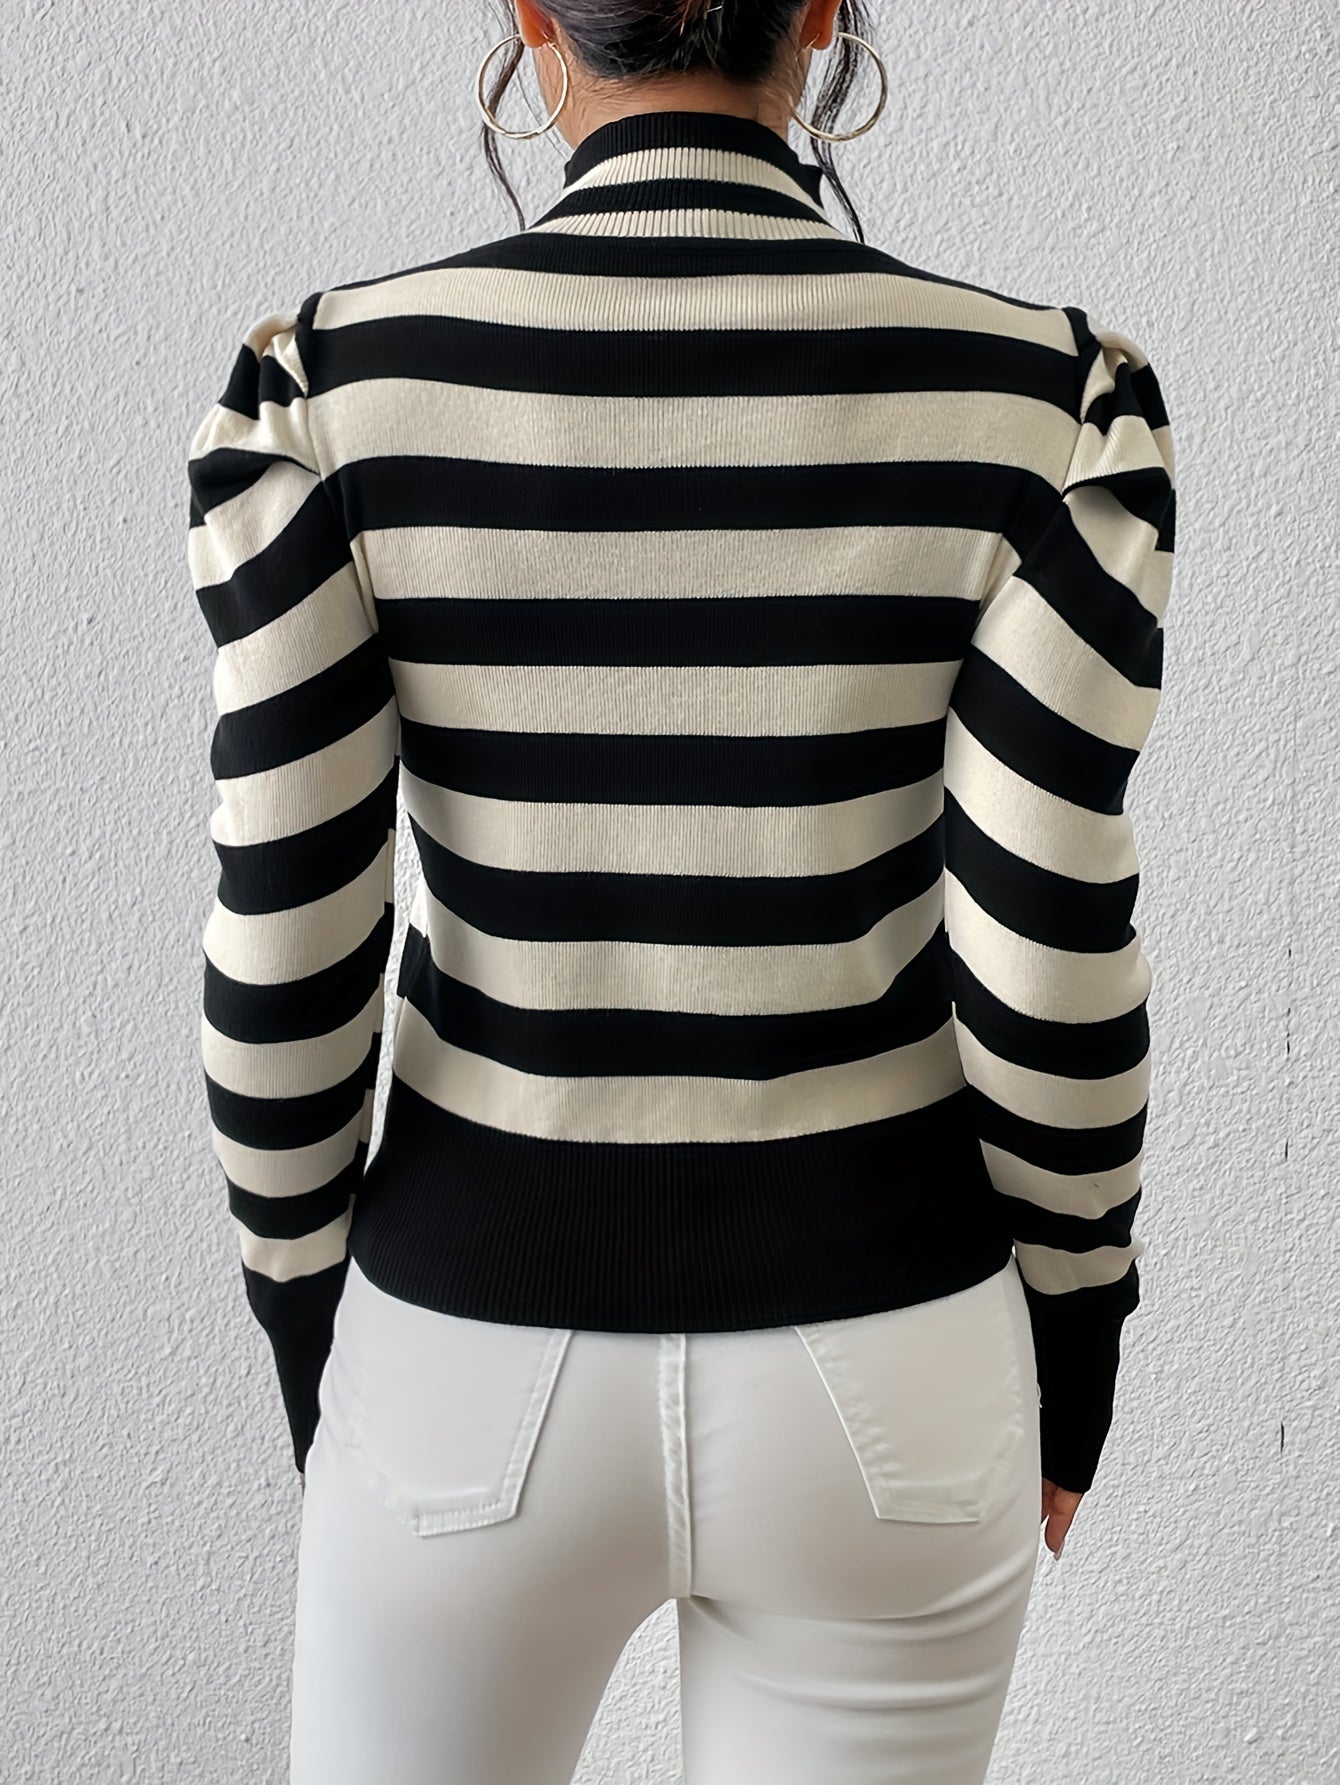 Antmvs Striped Print Shoulder Pads Top, Elegant Cut Out Long Sleeve Sweater For Spring & Fall, Women's Clothing